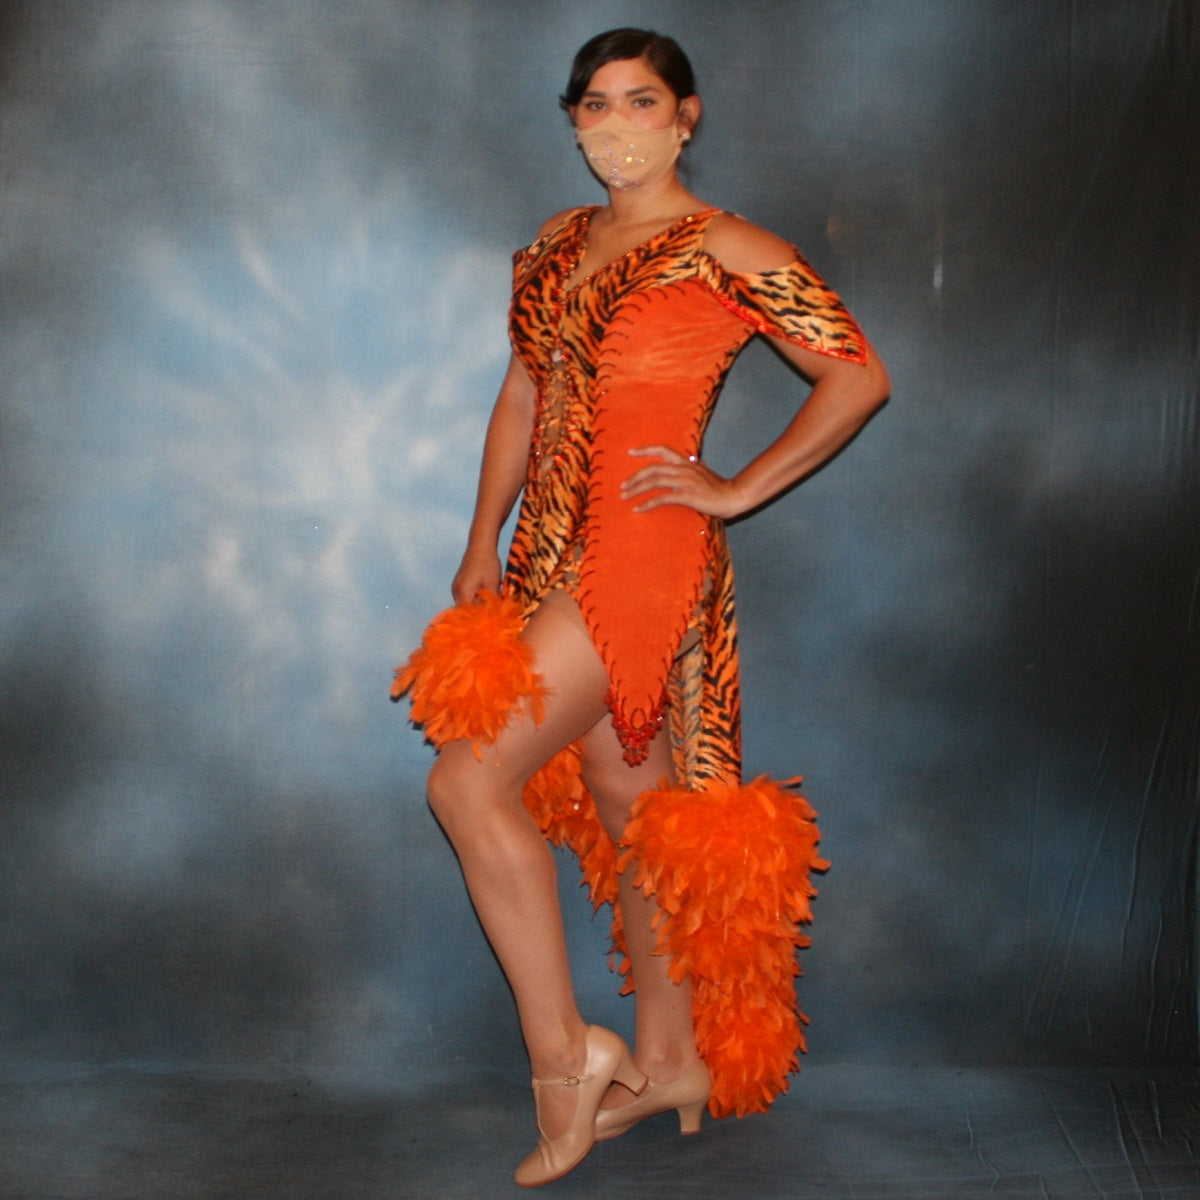 Crystal's Creations side view of Tiger print & orange Latin/rhythm dress created of tiger print lycra & luxurious orange solid slinky has color blocking, lattice work detailing in front bodice, split sides & low back, as well as intriguing longer back skirting, adorned with orange chandelle feathers, also features detailed Swarovski rhinestone work!